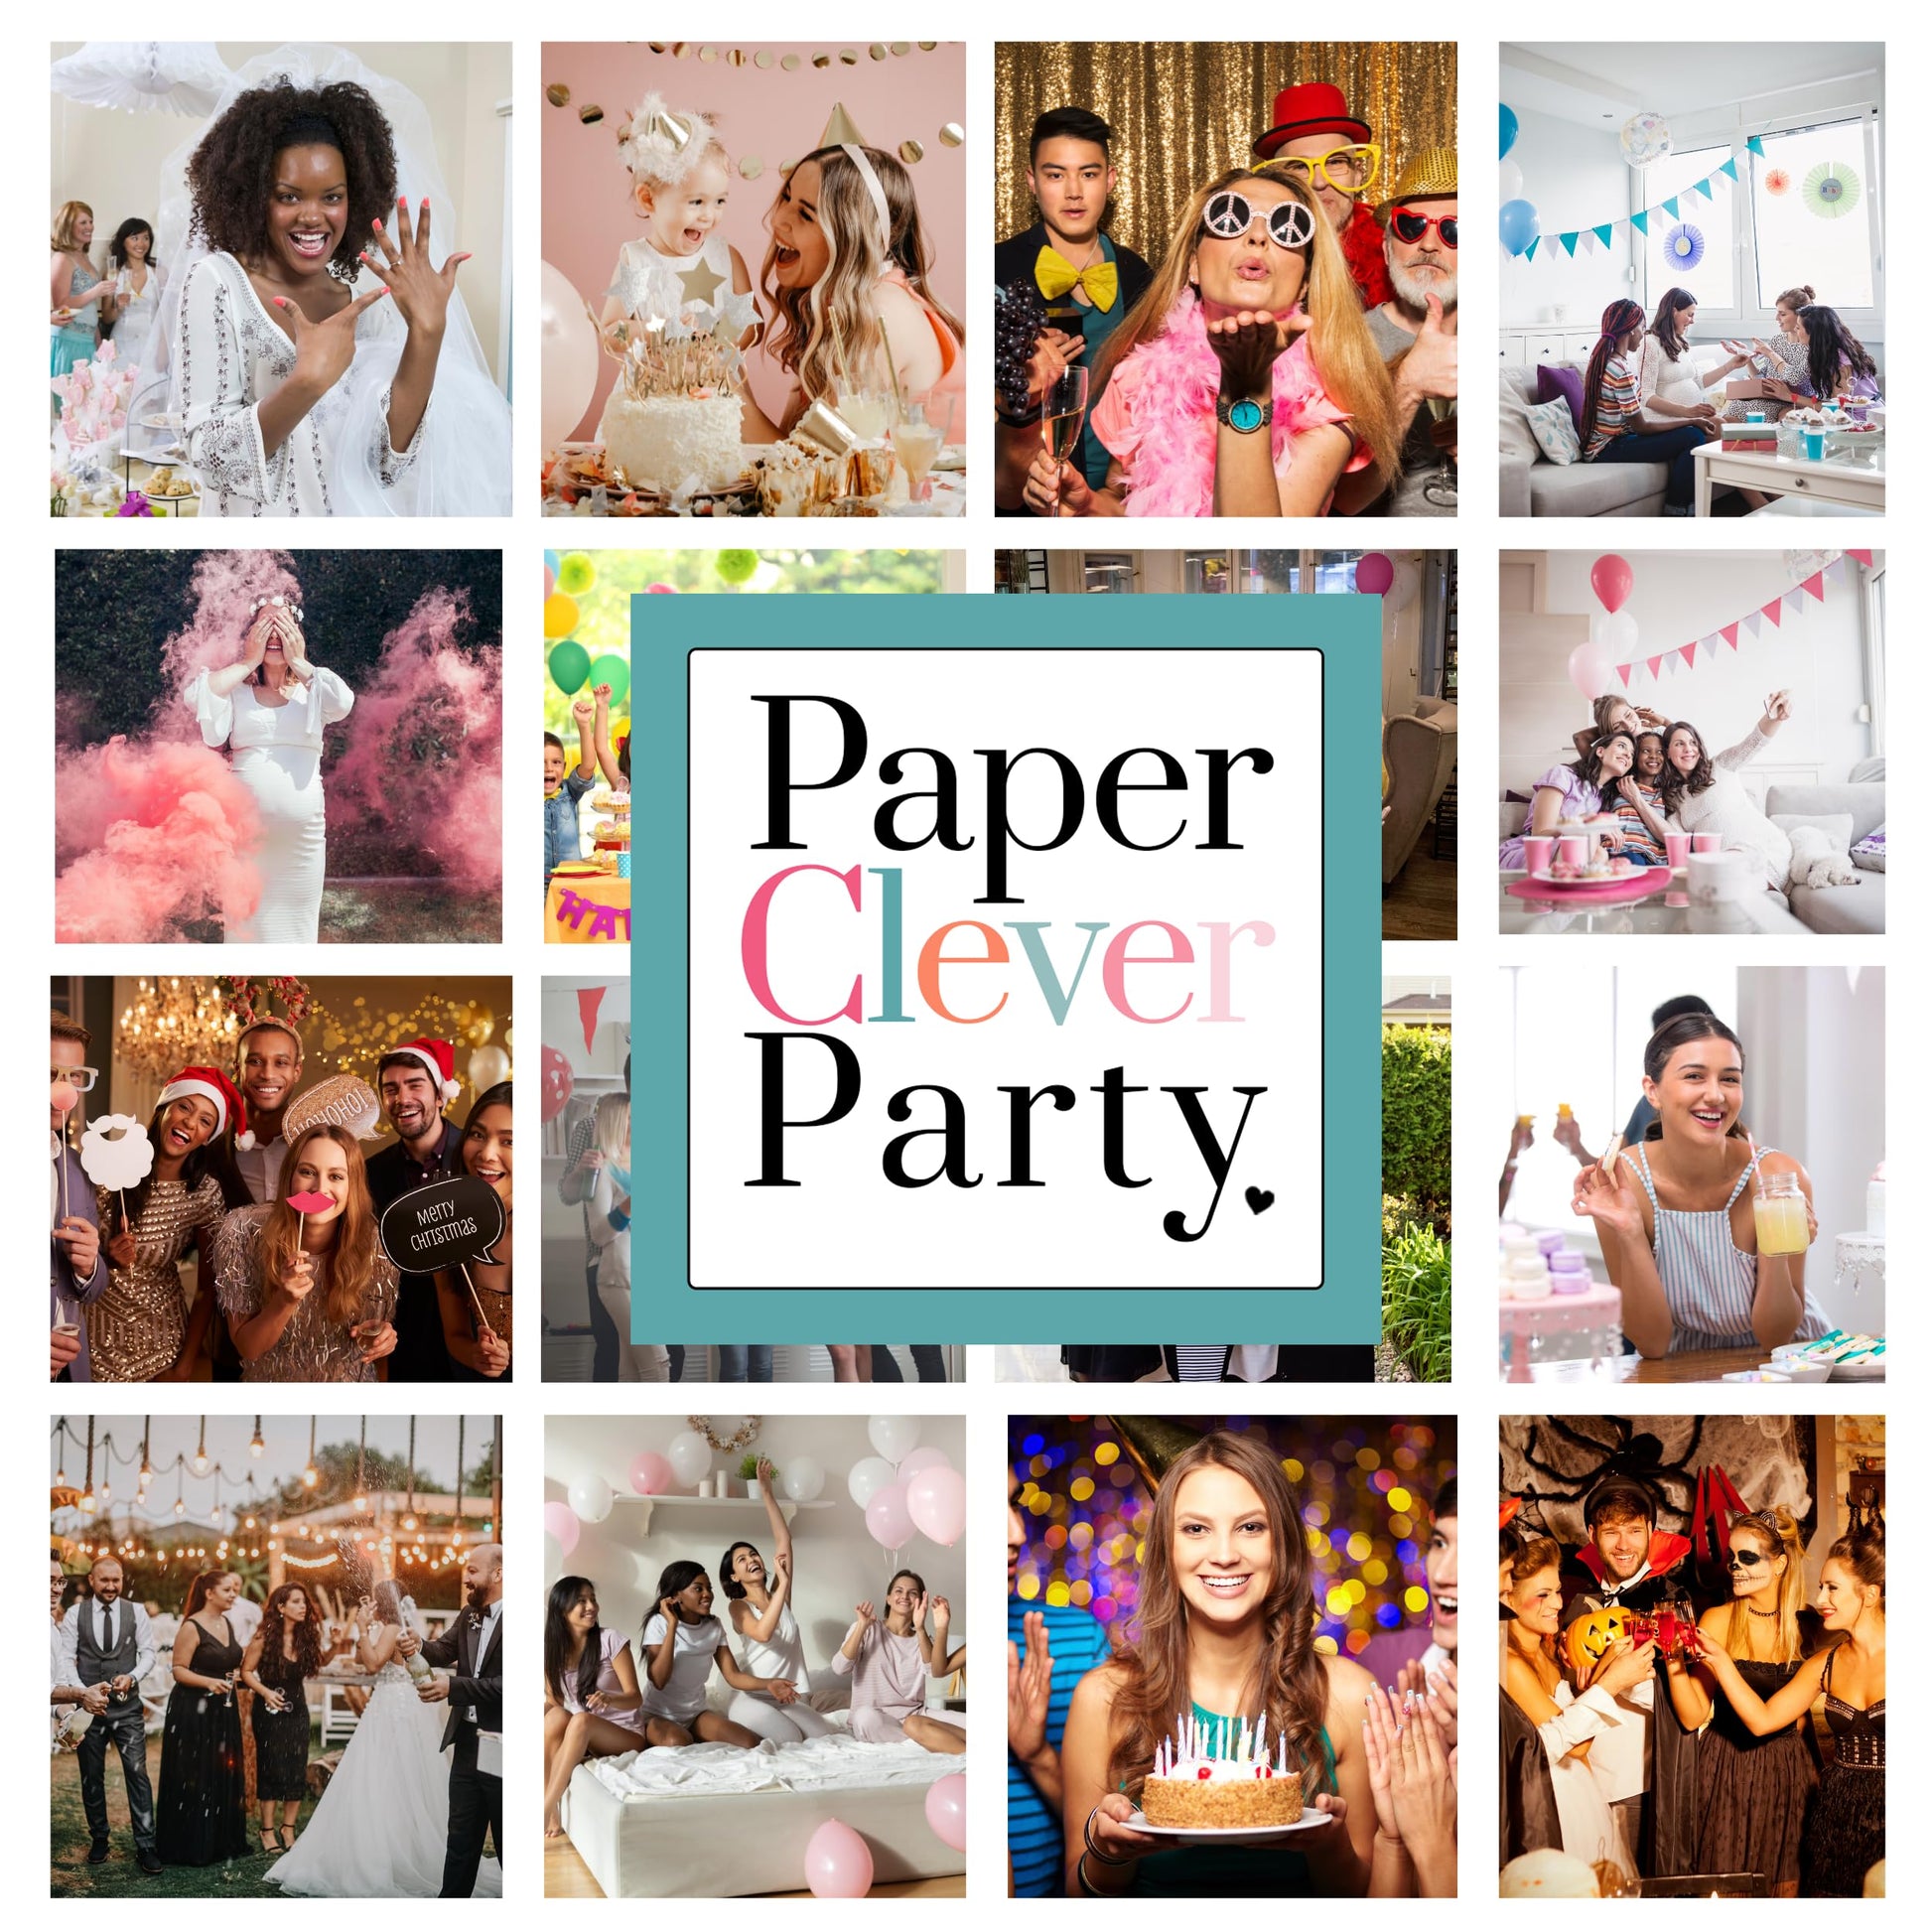 Win Prize Drawing Ideas Graduation Activities, Mermaid Themed FavorsPaper Clever Party